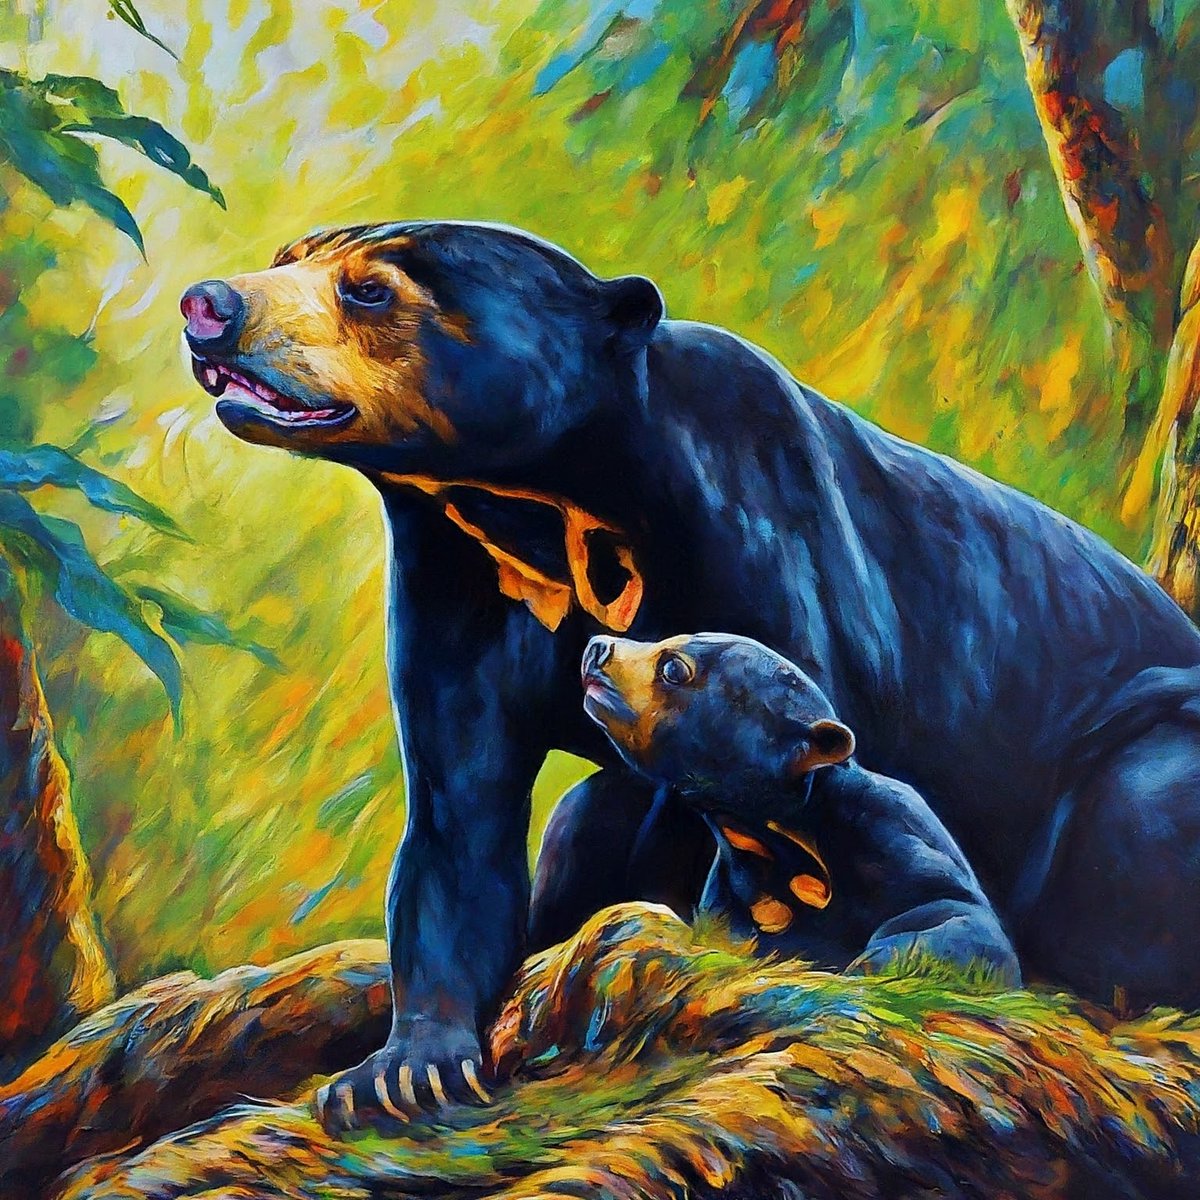 @HUAWEI_TECH4ALL The Malayan Sun Bears are facing many threats where only about 2,500 bears left in Malaysia. #Tech4Nature using Gemini